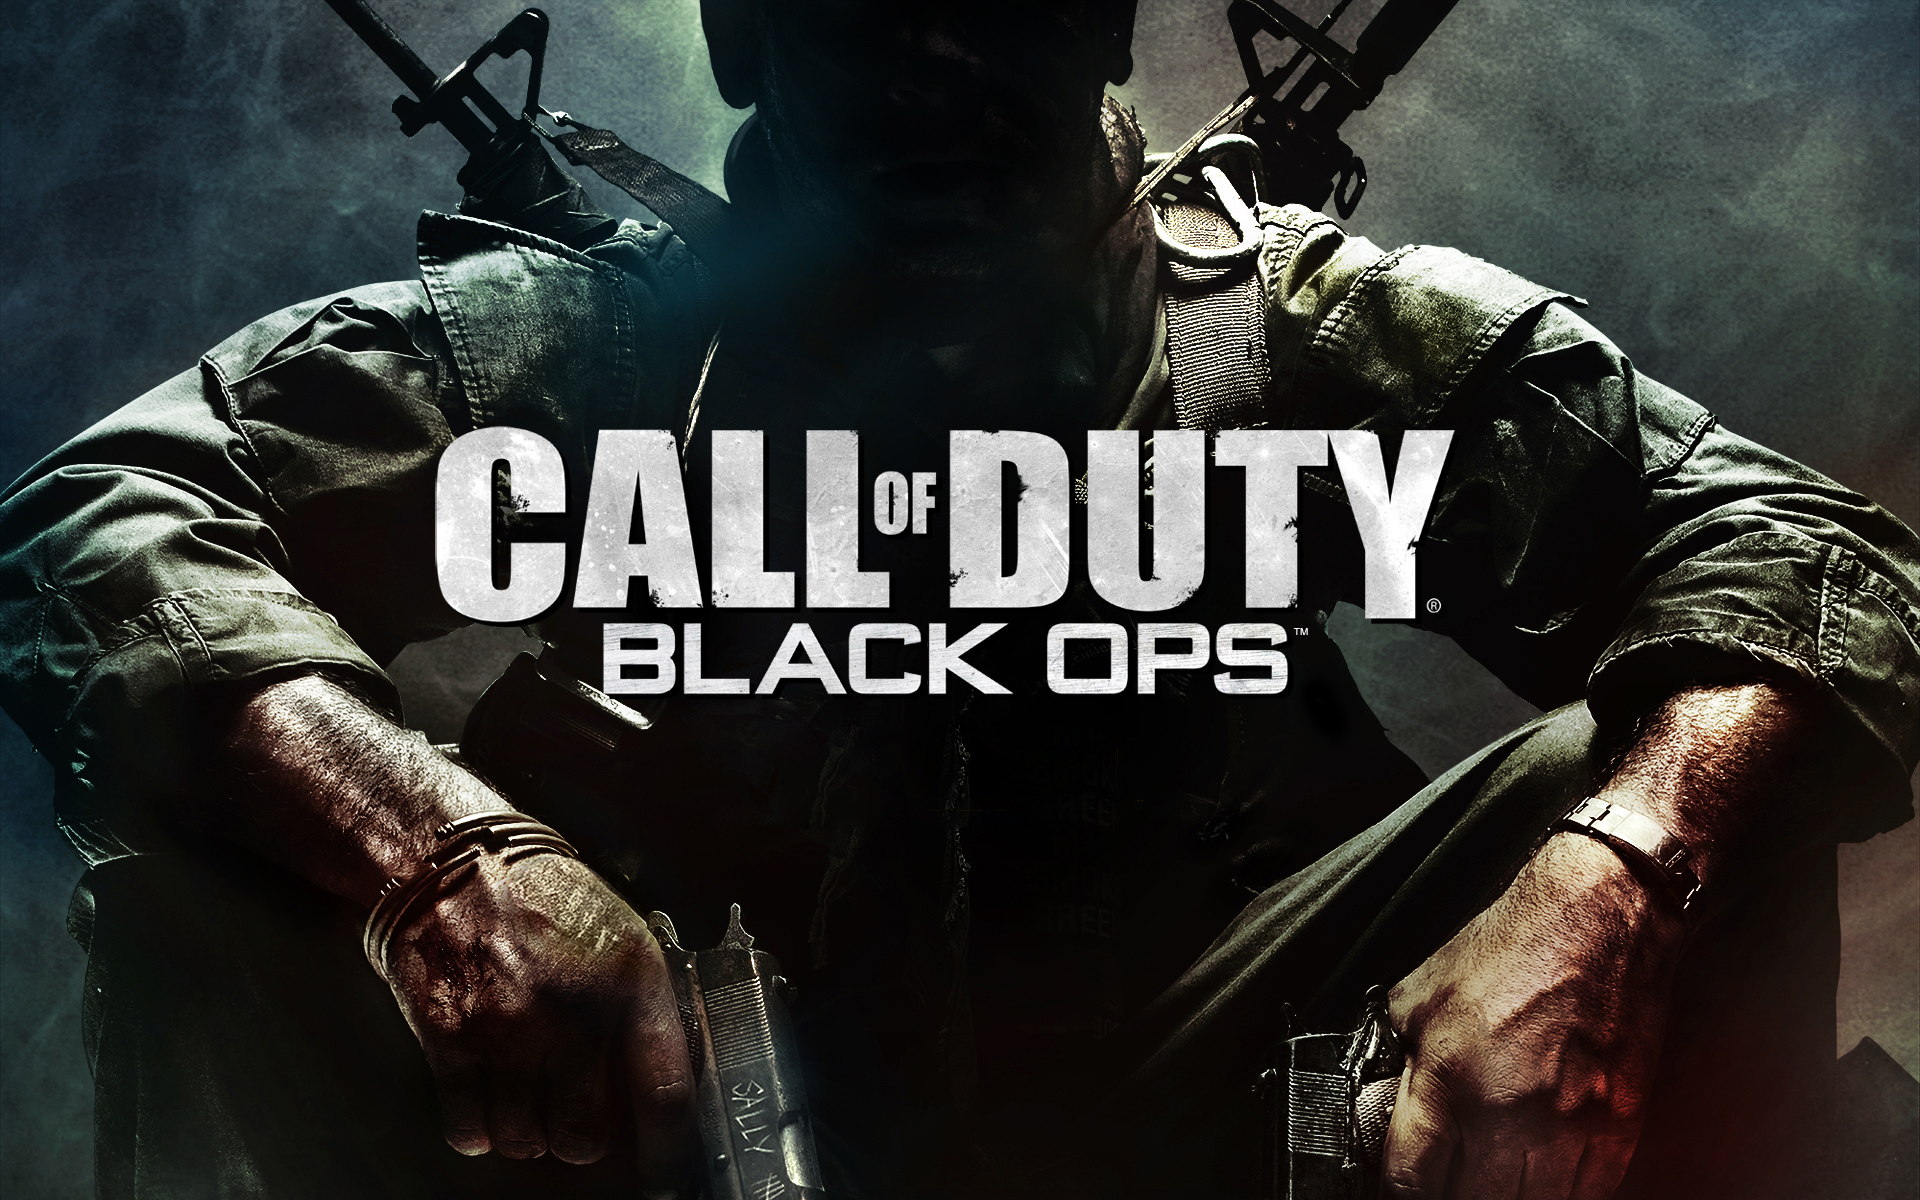 “Call of Duty: Black Ops” Now Available On Xbox One - With 